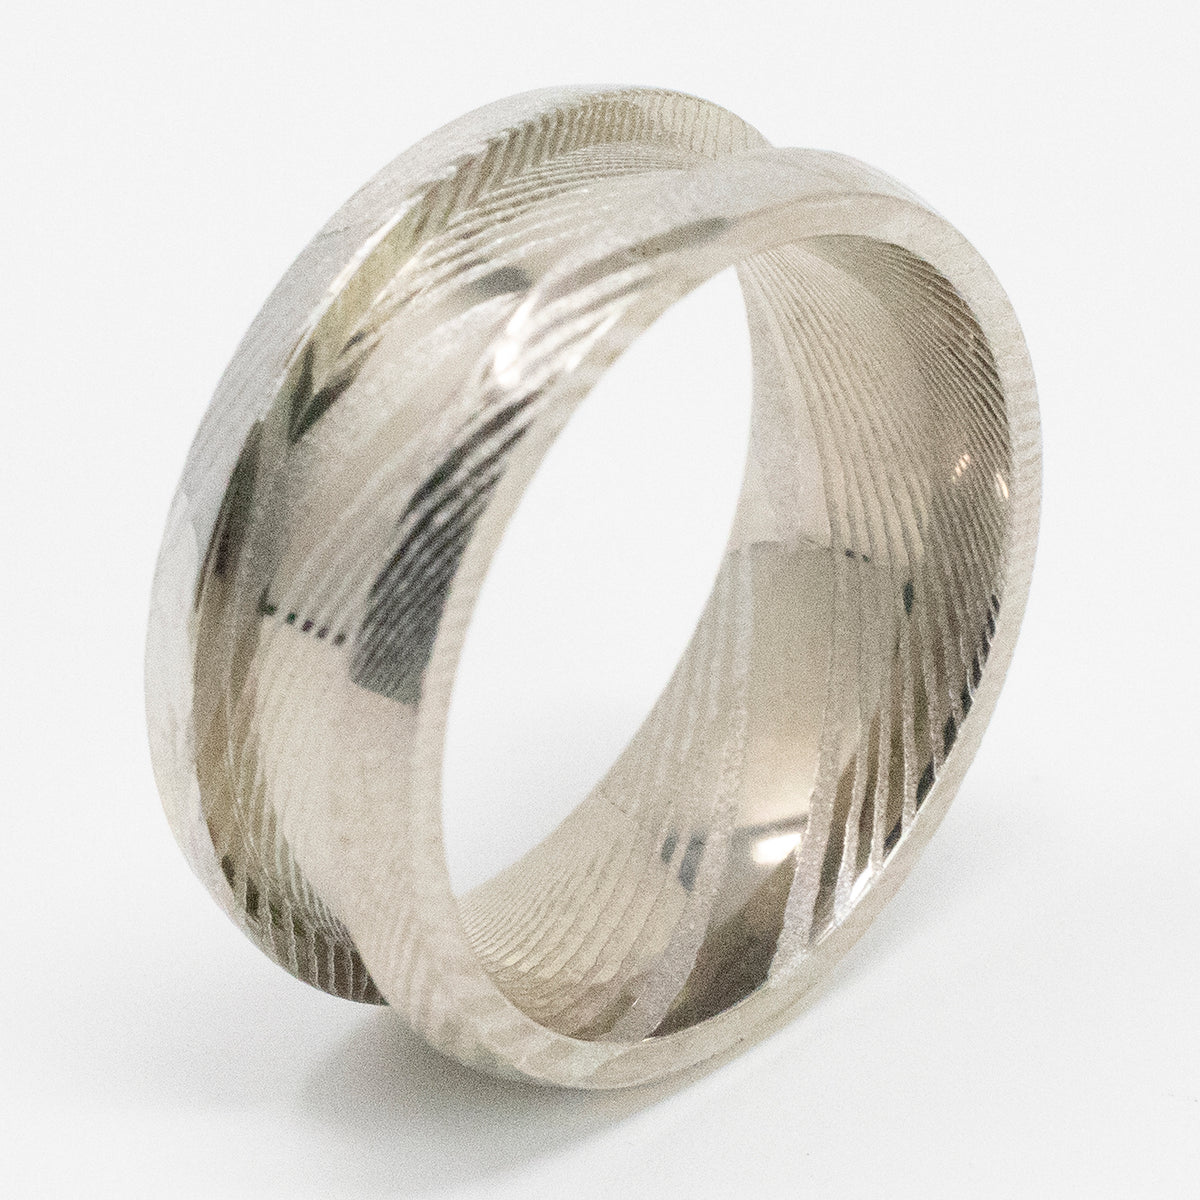 Inlay Comfort Ring Core - Stainless Steel - 4mm